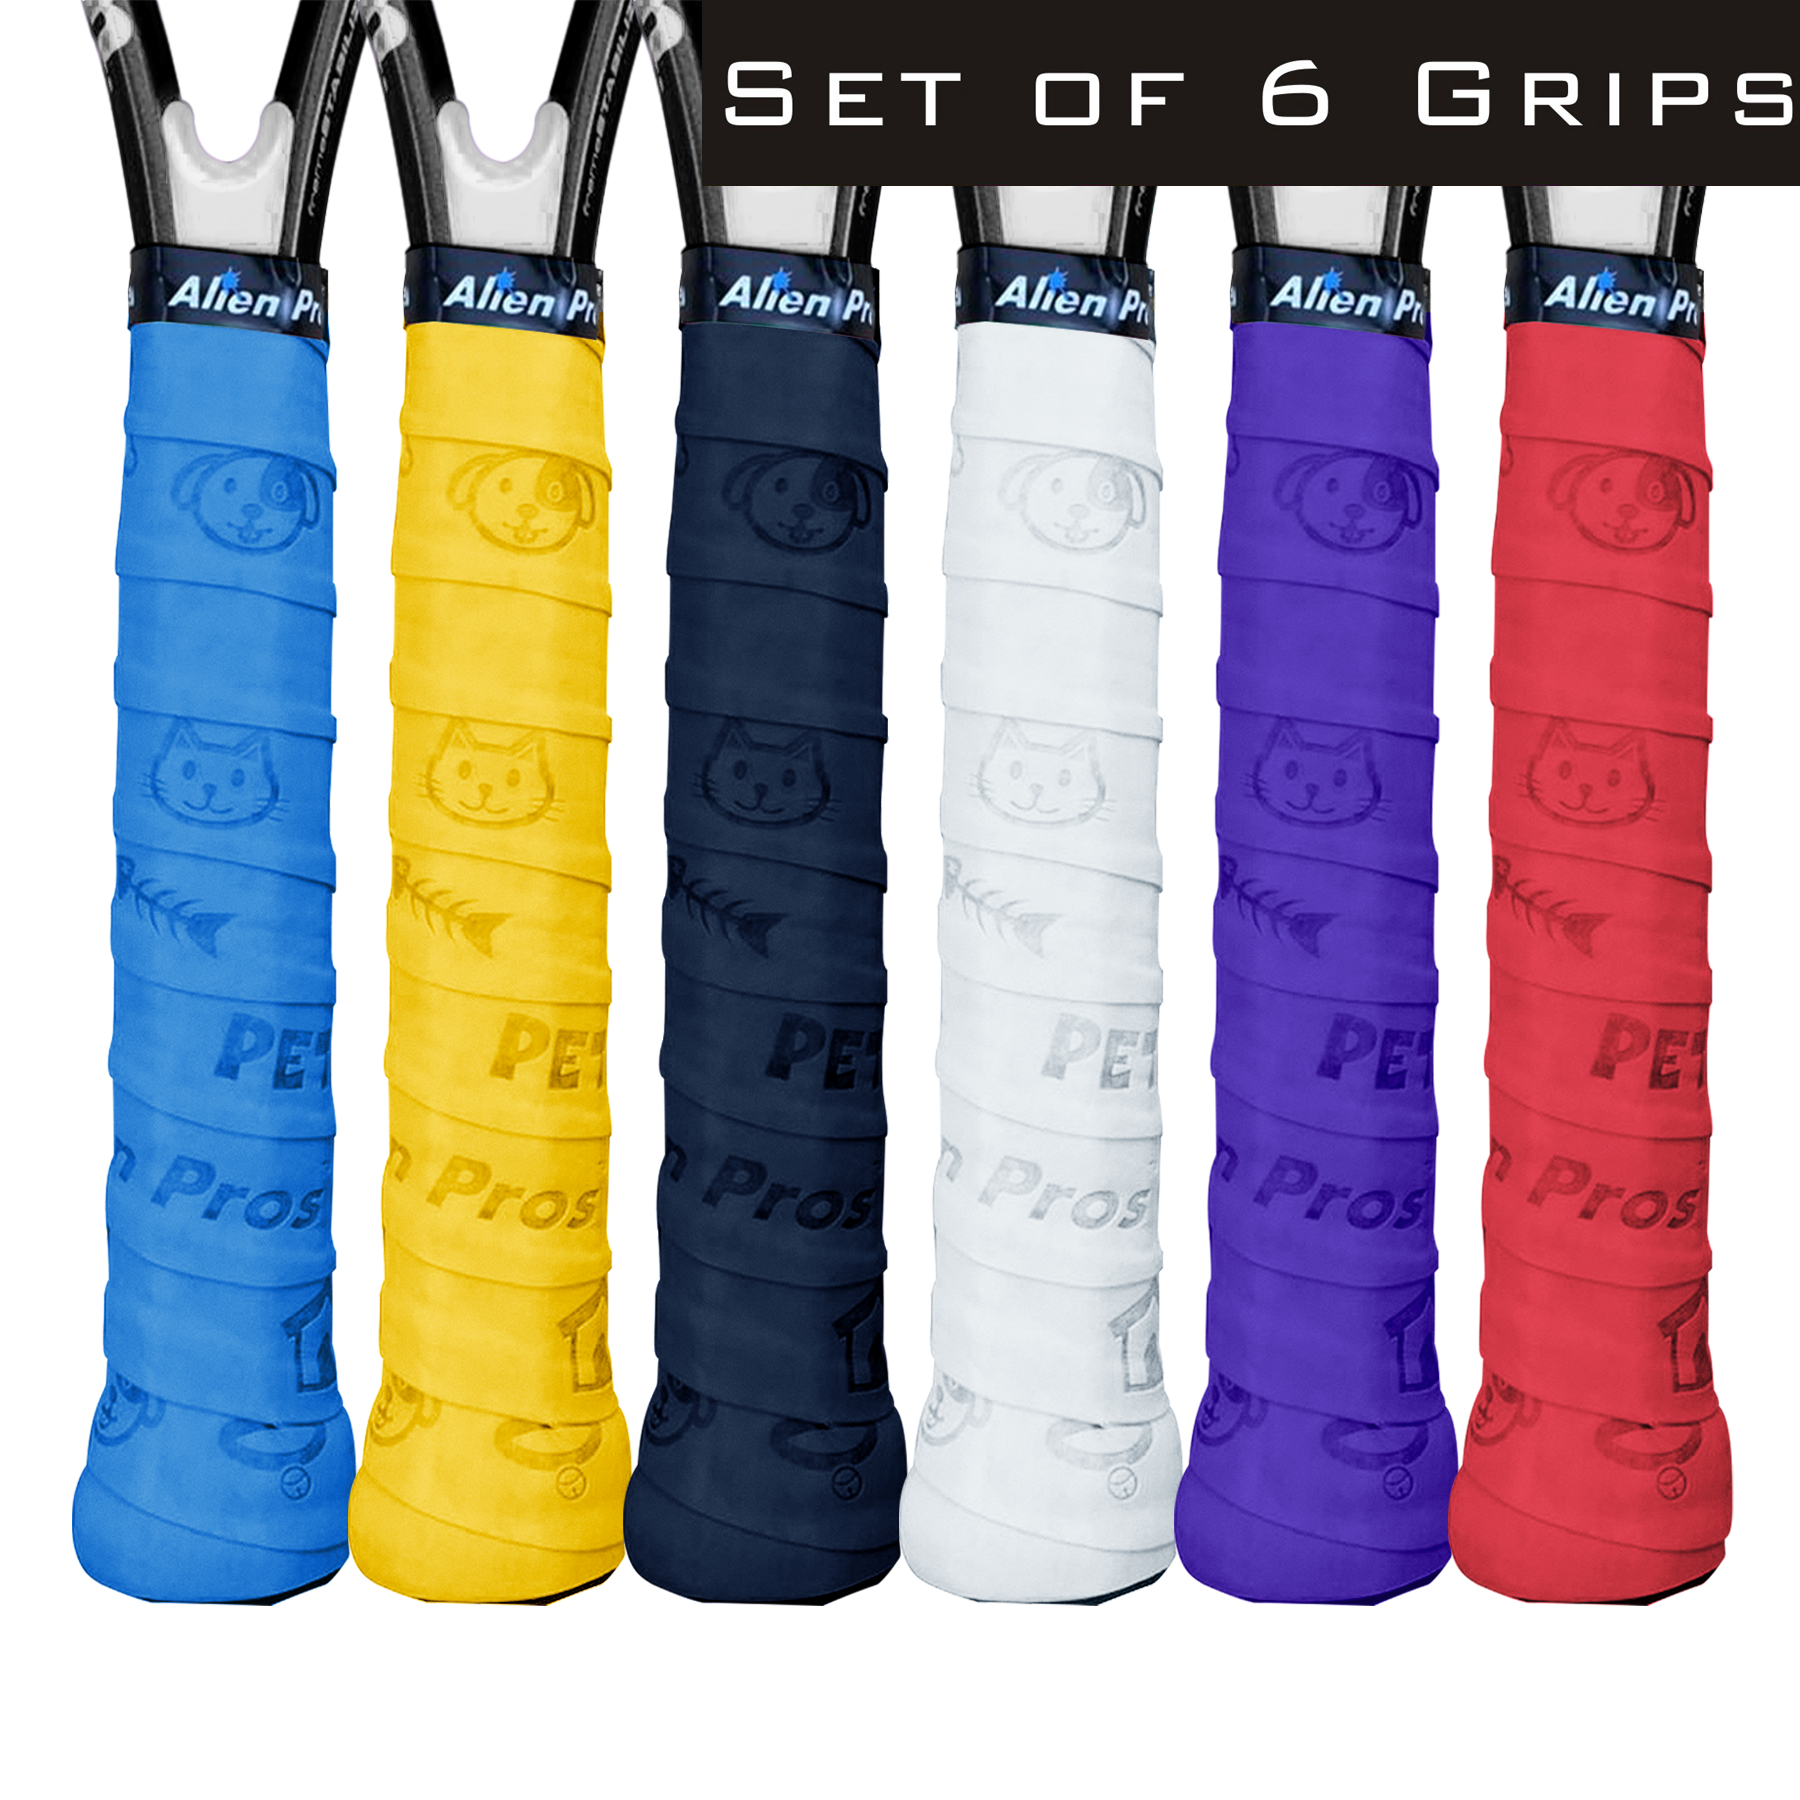 What is a tennis grip cover - Epirus London